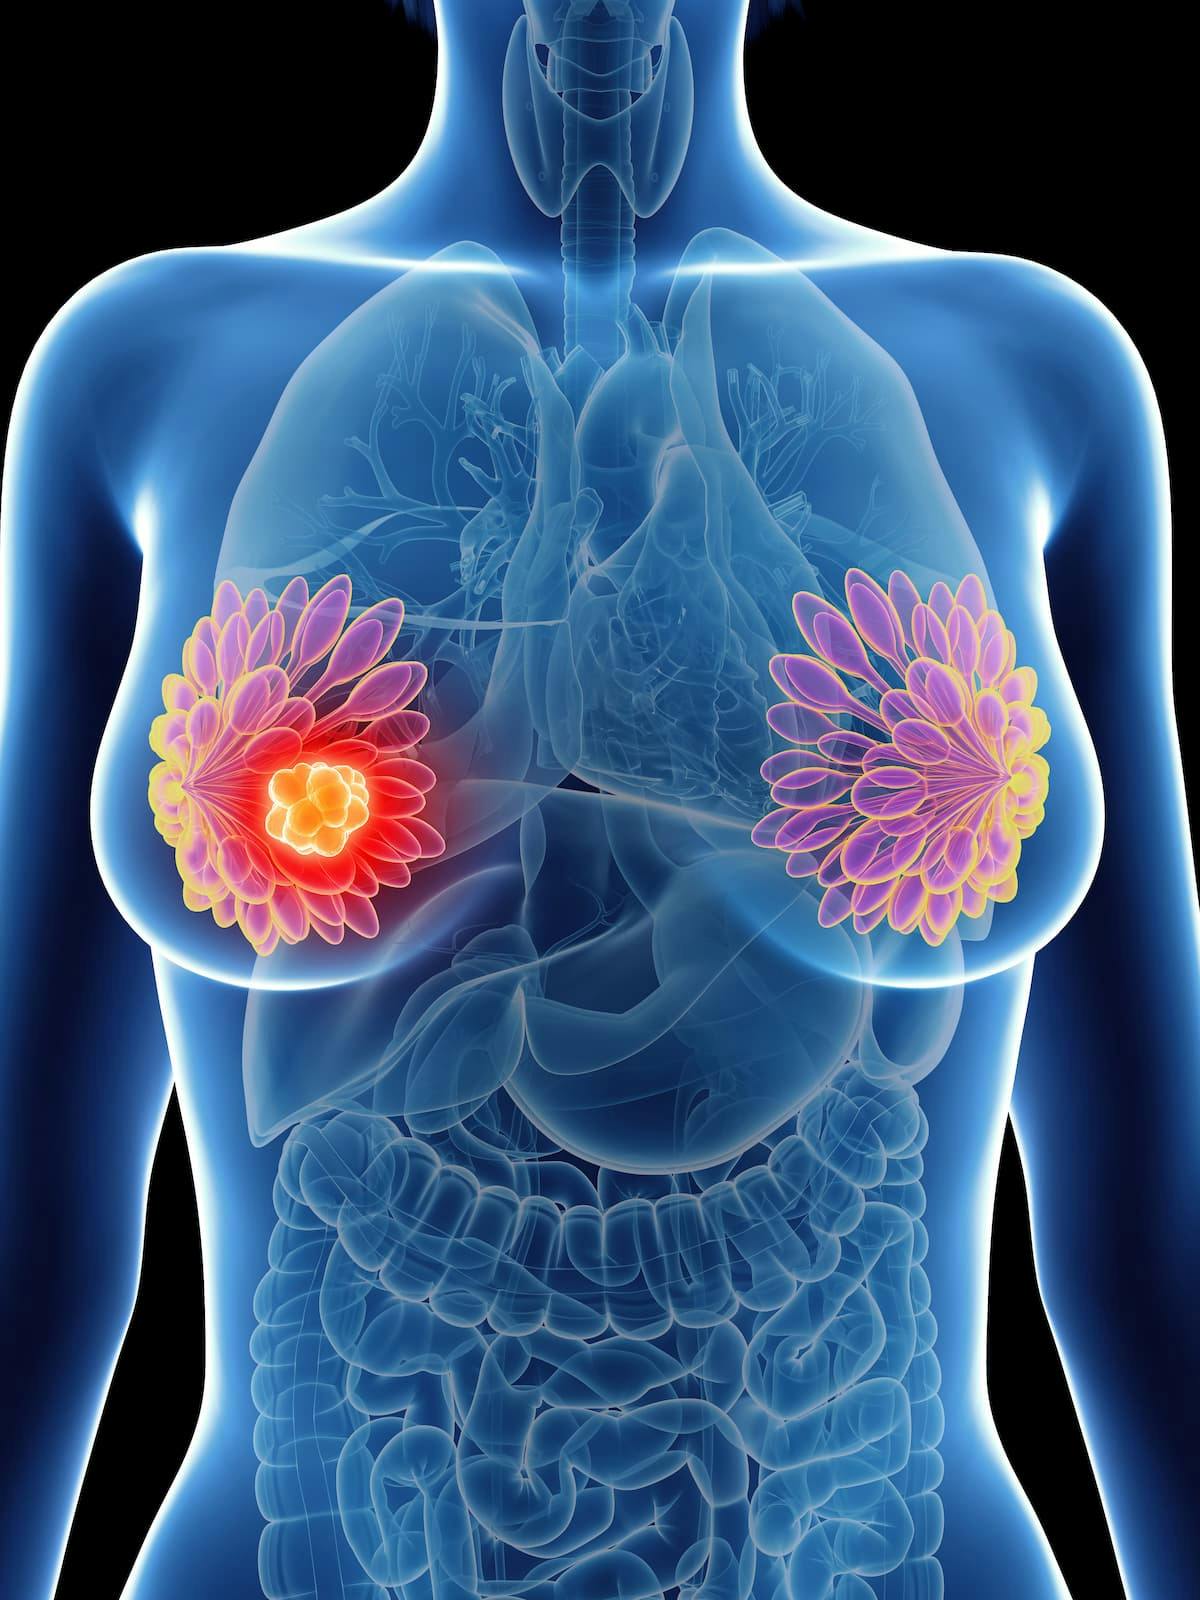 "In addition to the 3.6-mg monthly dose, I am pleased to see that the NCCN recognizes the role of goserelin [at] 10.8 mg every 12 weeks as an option for premenopausal [patients] with HR-positive breast cancer," according to Virginia Kaklamani, MD.